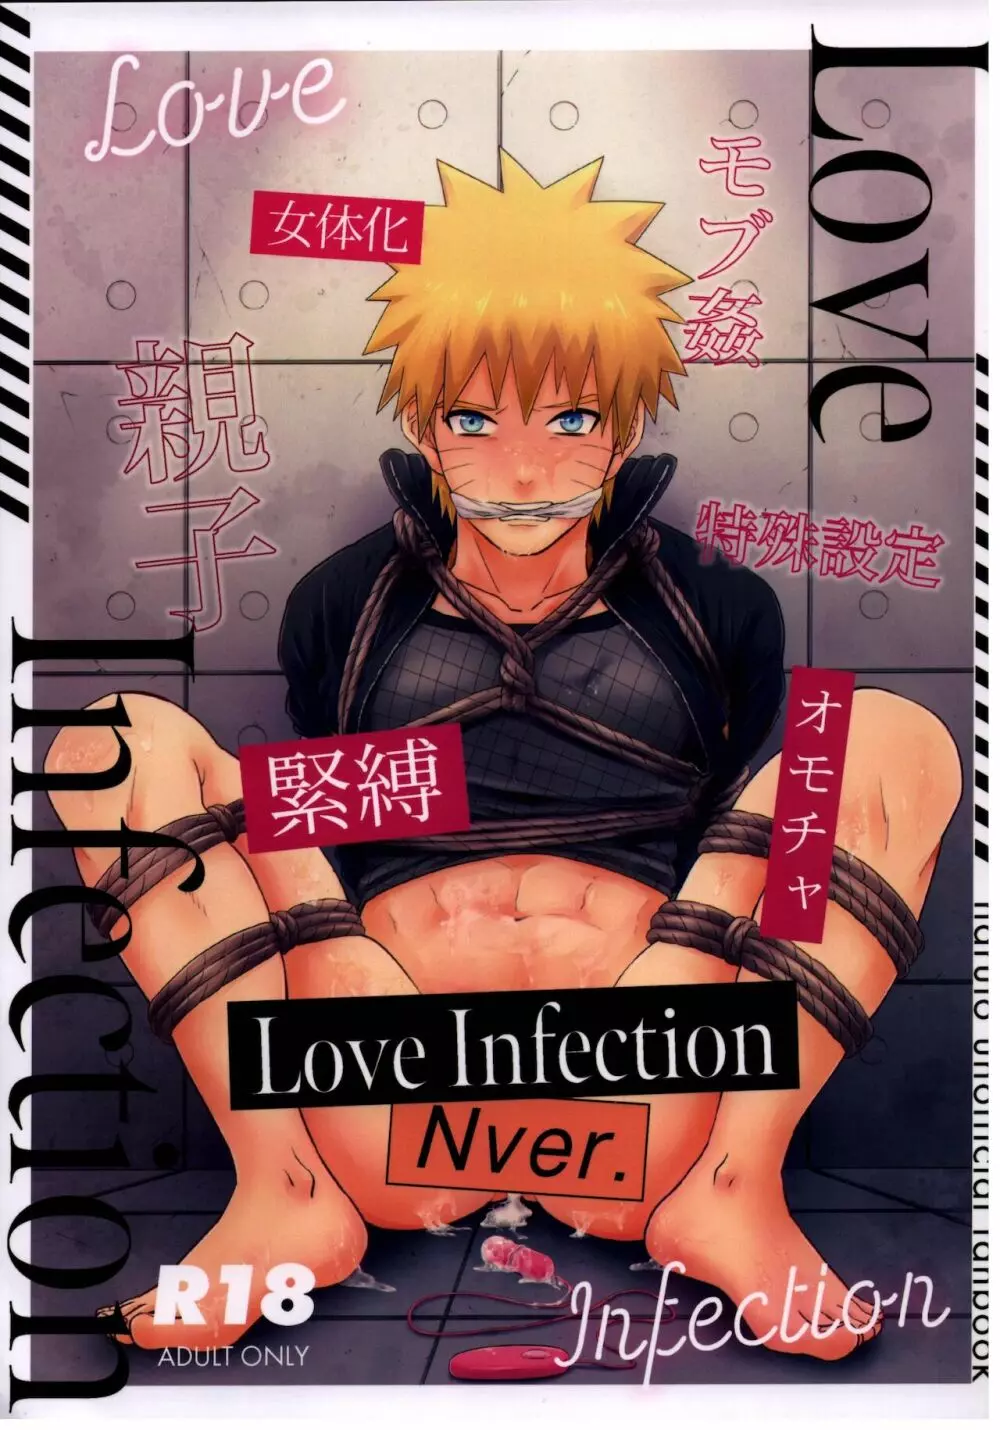 Love Infection Nver.